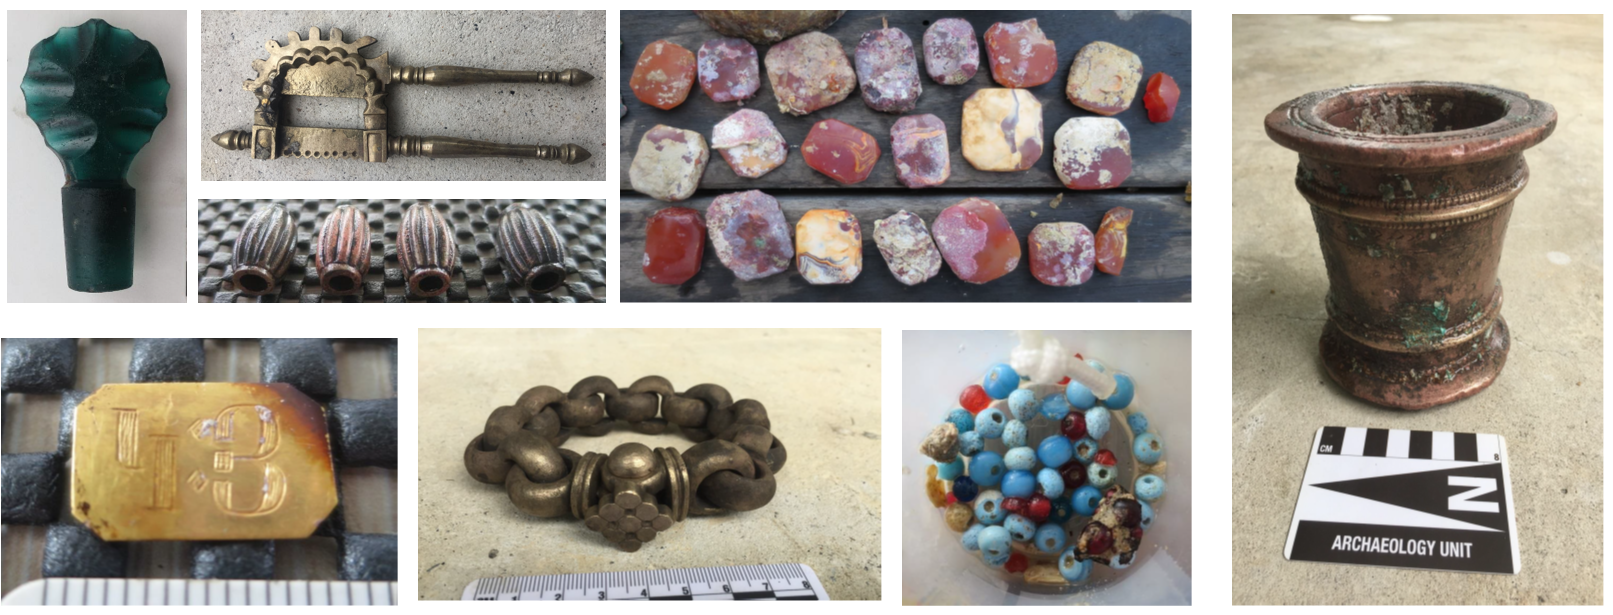 Range of artefacts, recovered from Shipwreck 2. Photo credit: ISEAS-Yusof Ishak Institute.